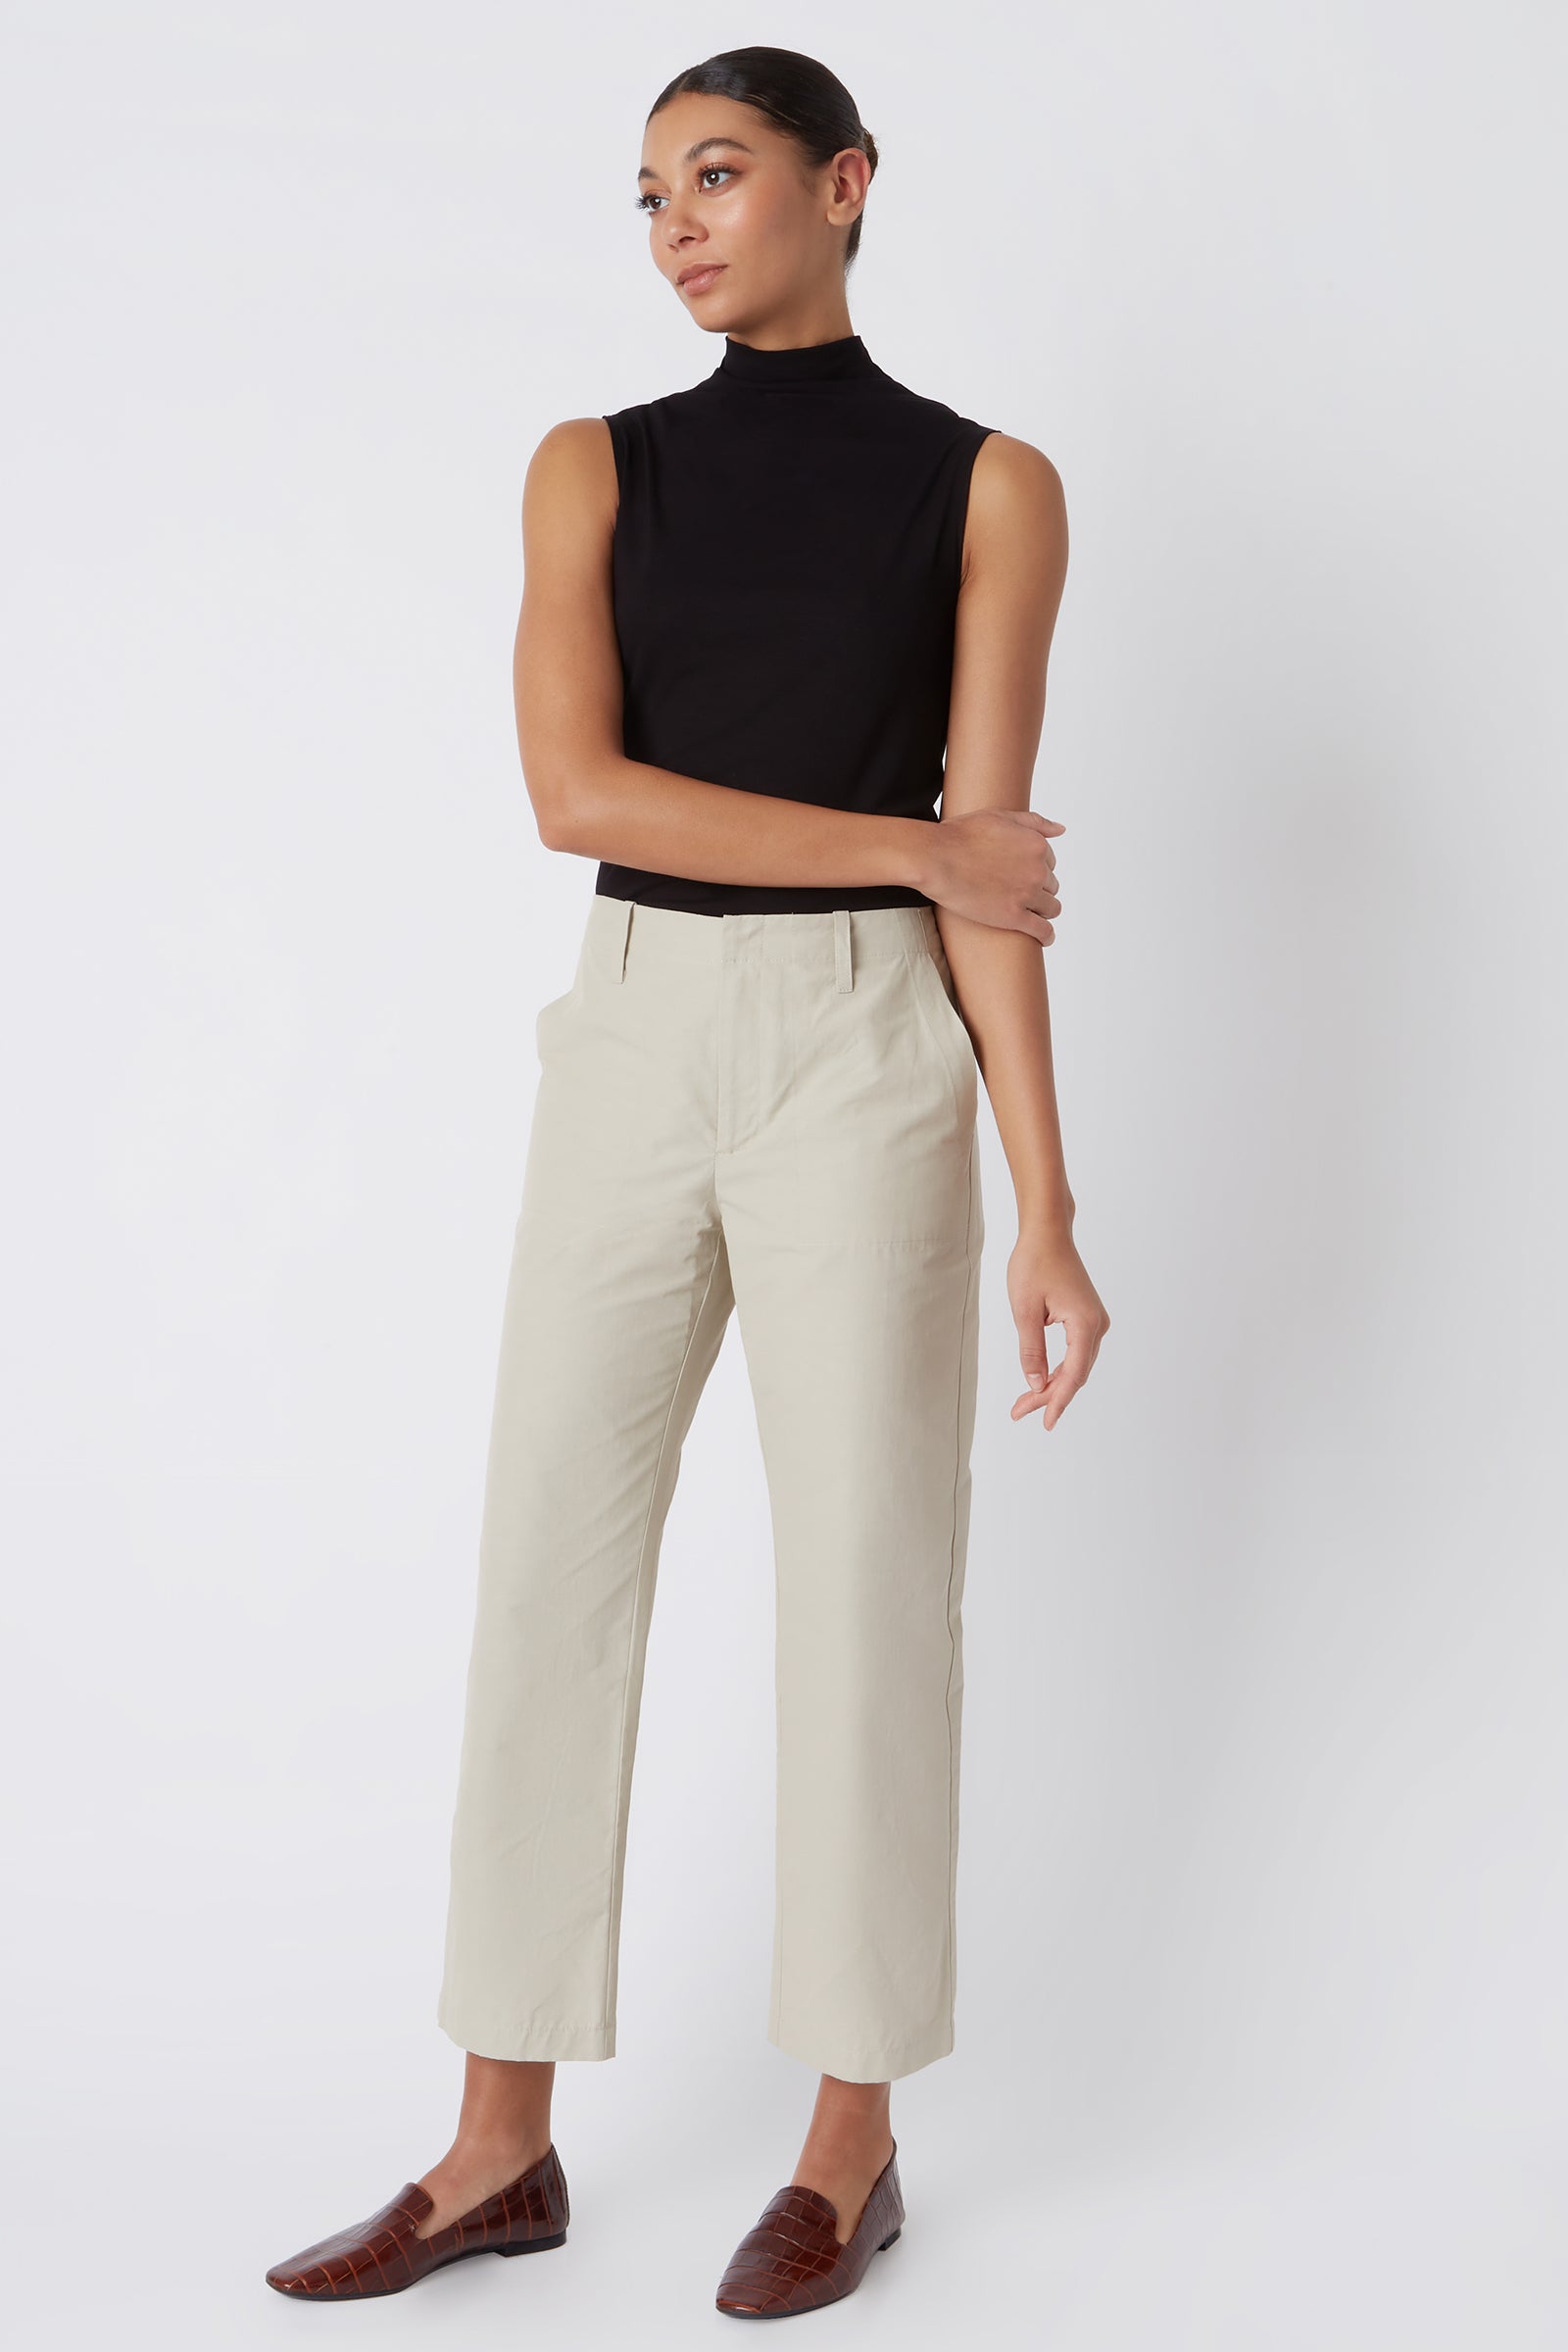 Kal Rieman Francoise Cigarette Pant in Classic Khaki Italian Broadcloth on Model with Arm Crossed Full Front View